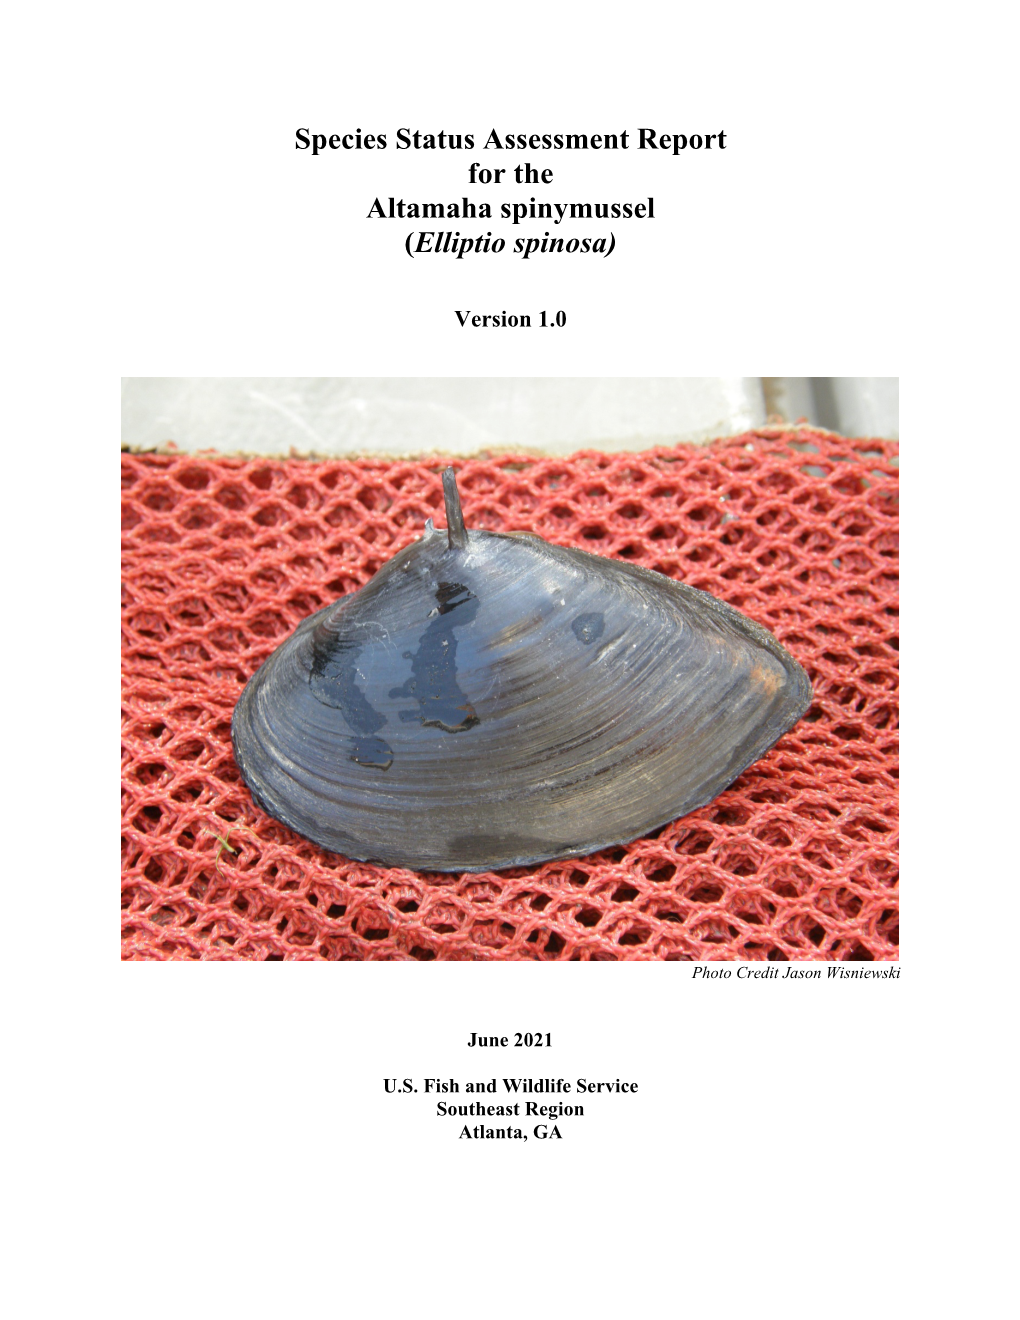 Species Status Assessment Report for the Altamaha Spinymussel (Elliptio Spinosa)